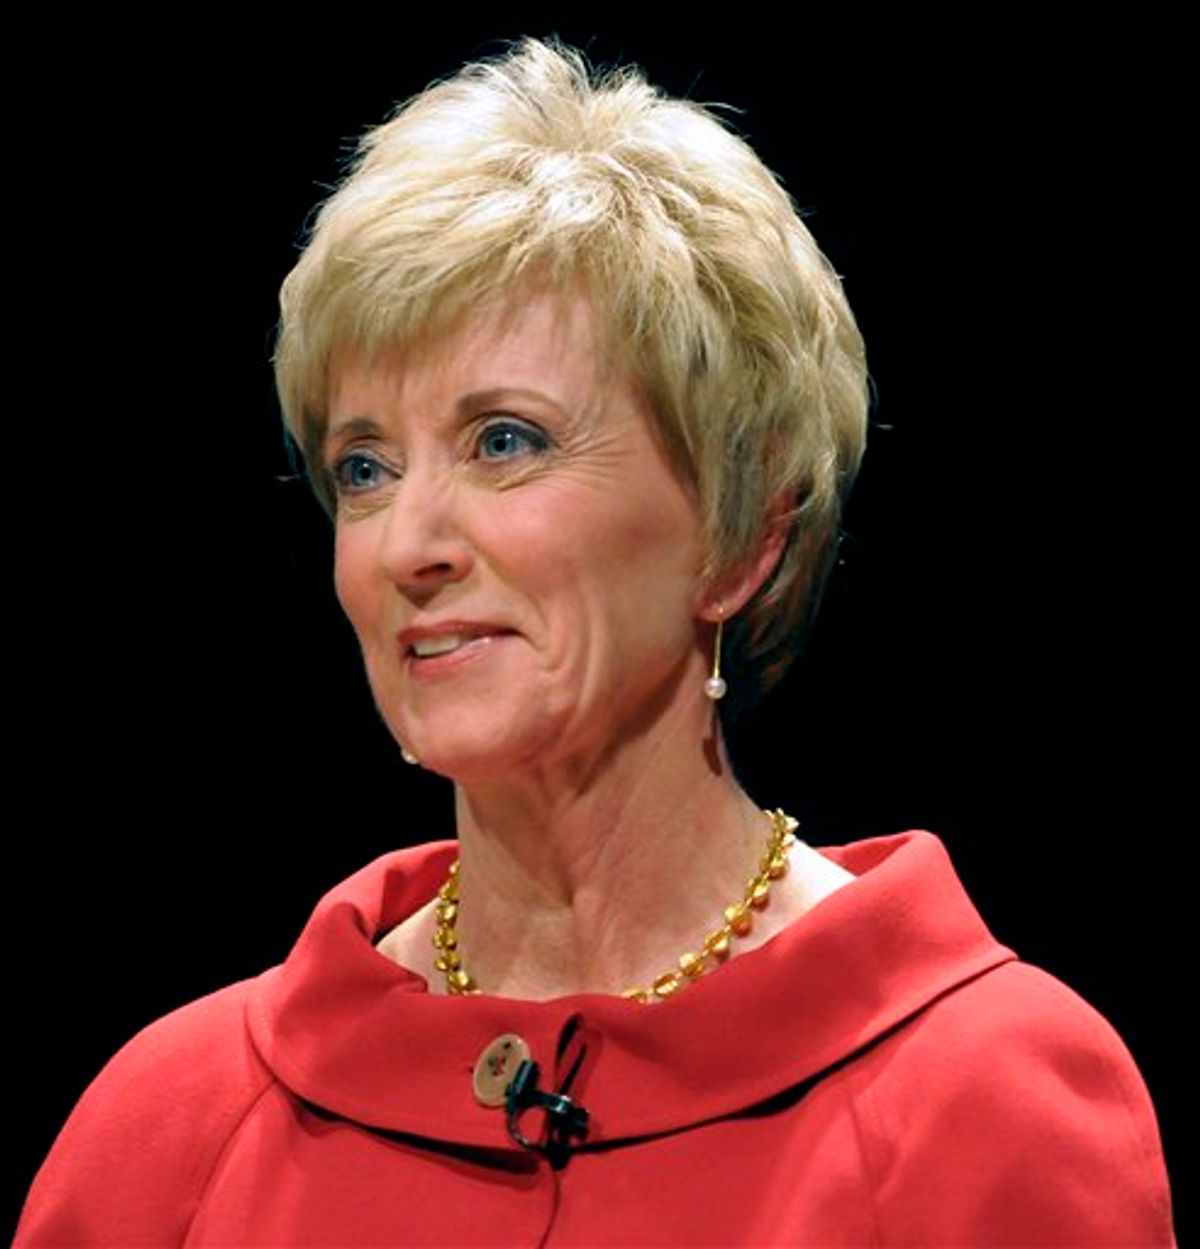 FILE - In this March 2, 2010 file pool photo, former World Wrestling Entertainment CEO Linda McMahon attends a debate with money manager Peter Schiff and former Congressmen Rob Simmons at the Lincoln Theater on the University of Hartford campus in West Hartford, Conn. The widow of a World Wrestling Entertainment performer who died in a 1999 stunt says she's suing the Connecticut-based company and its leaders, including Republican U.S. Senate candidate Linda McMahon. Martha Hart, widow of Owen Hart, plans to file her lawsuit Tuesday, June 22, 2010, in U.S. District Court in Hartford. (AP Photo/John Woike, Pool, File)  (AP)